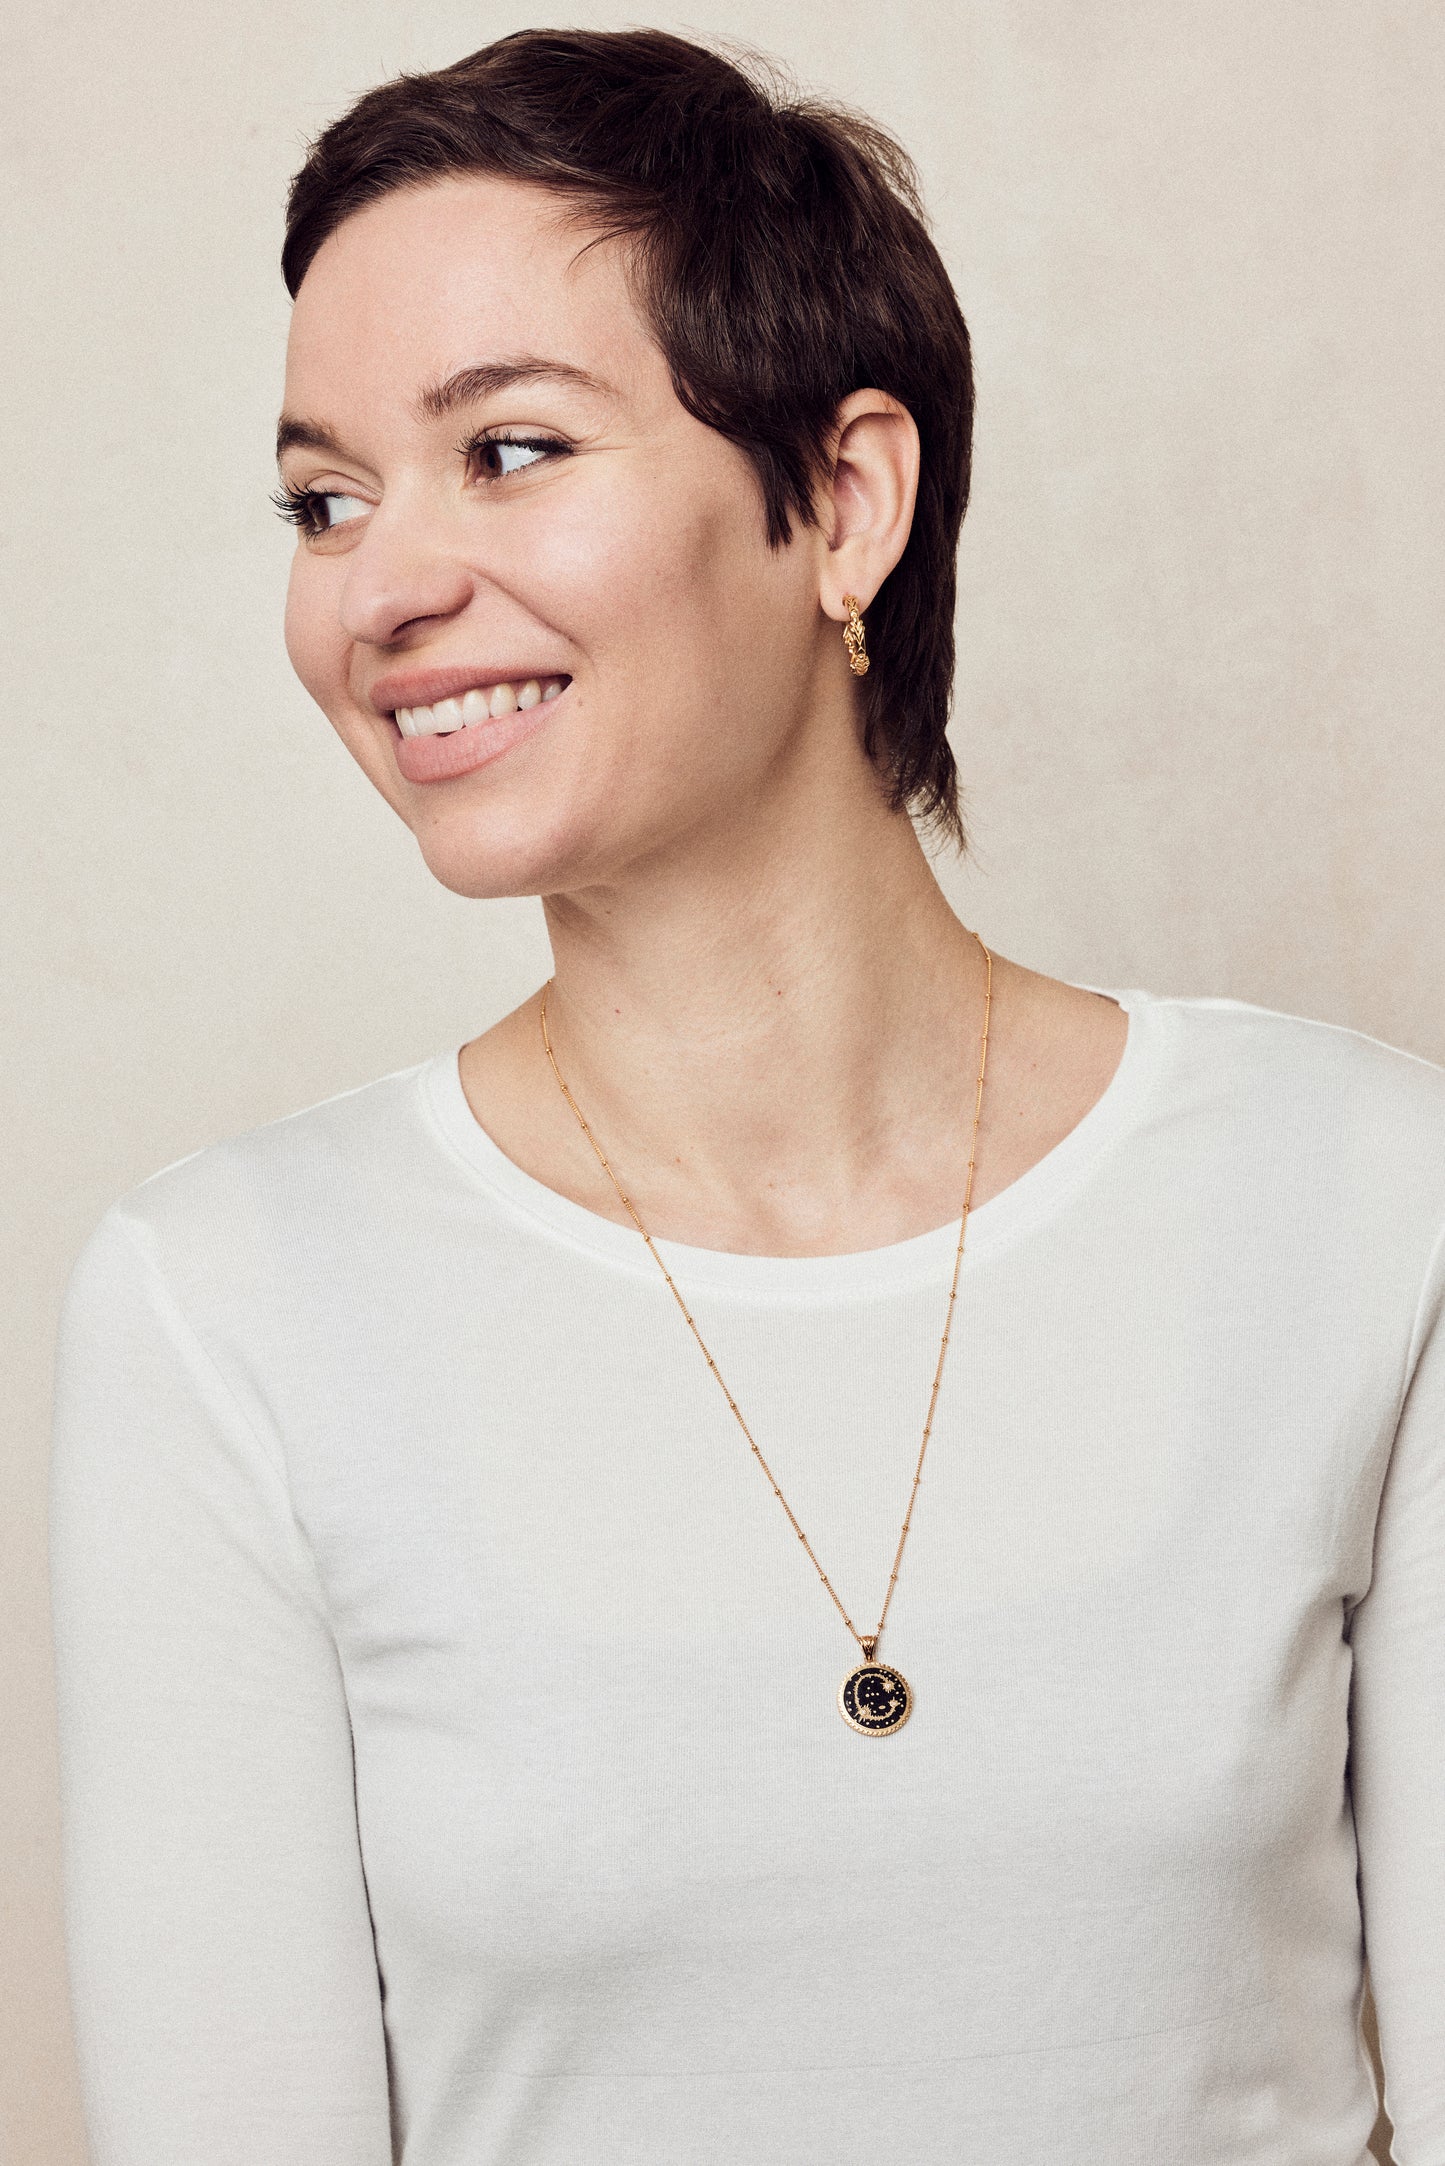 image of sparkler diamond initial necklace, letter C on long chain, on model in white long-sleeved top with short brown hair smiling